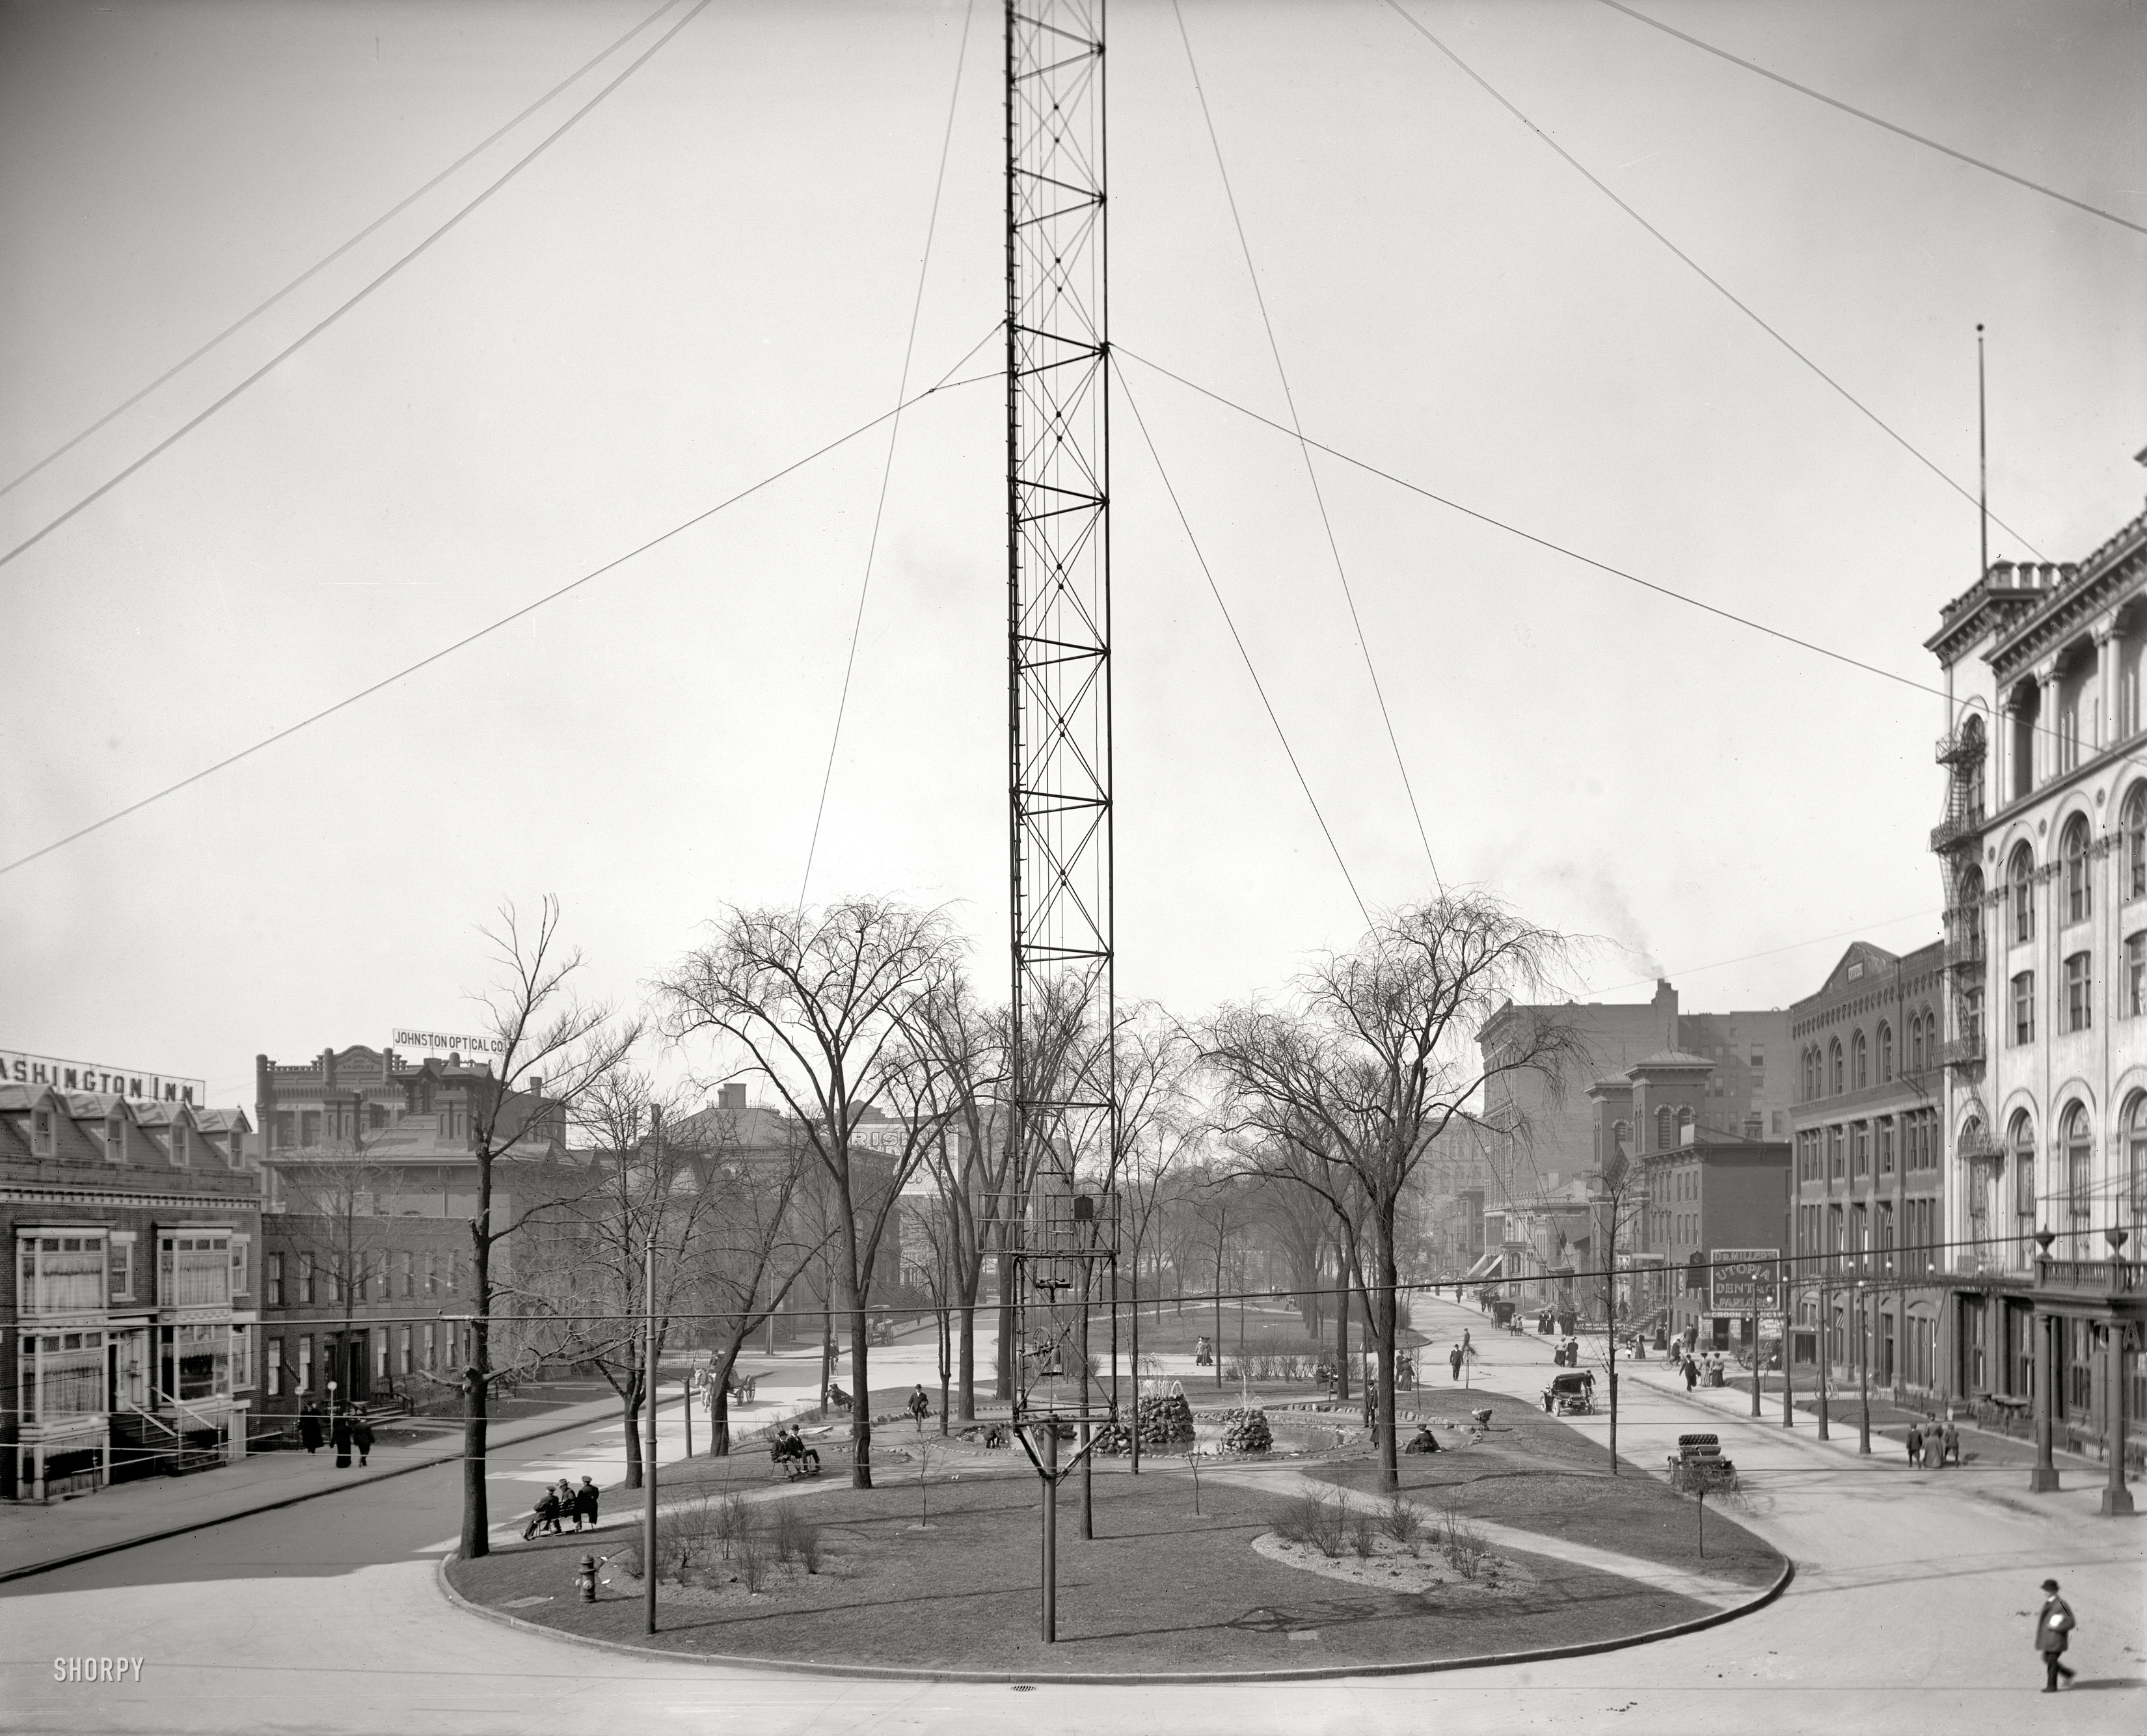 Detroit circa 1907. "Washington Boulevard Park." Adjacent to the Hotel Cadillac, at right, and the site of the ice fountain seen here in several wintertime views. Rising at center is  the base of an arc-lamp standard, part of the city's "moonlight tower" municipal lighting system. 8x10 inch glass negative. View full size.